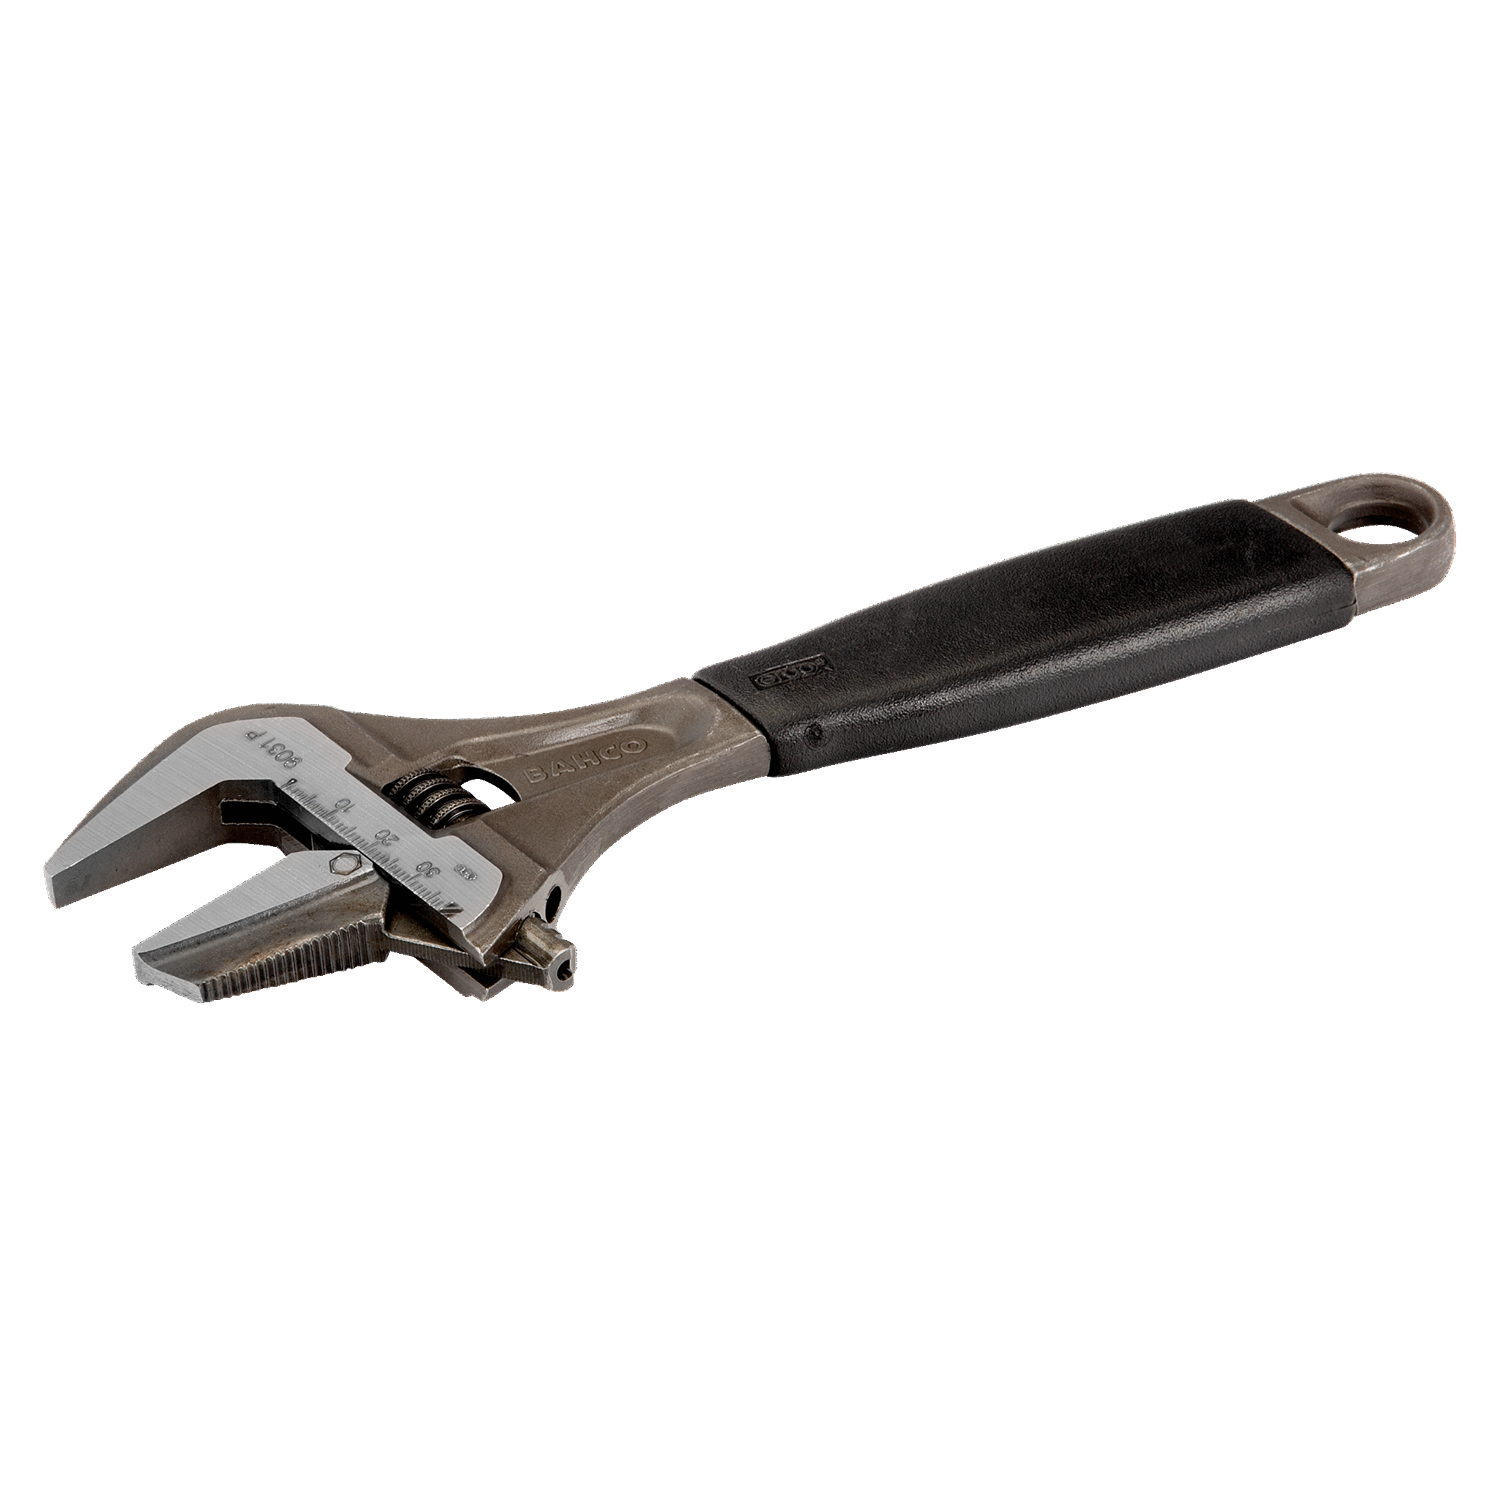 BAHCO 9031P ERGO Central Nut Reversible Extra Adjustable Wrench - Premium Adjustable Wrench from BAHCO - Shop now at Yew Aik.